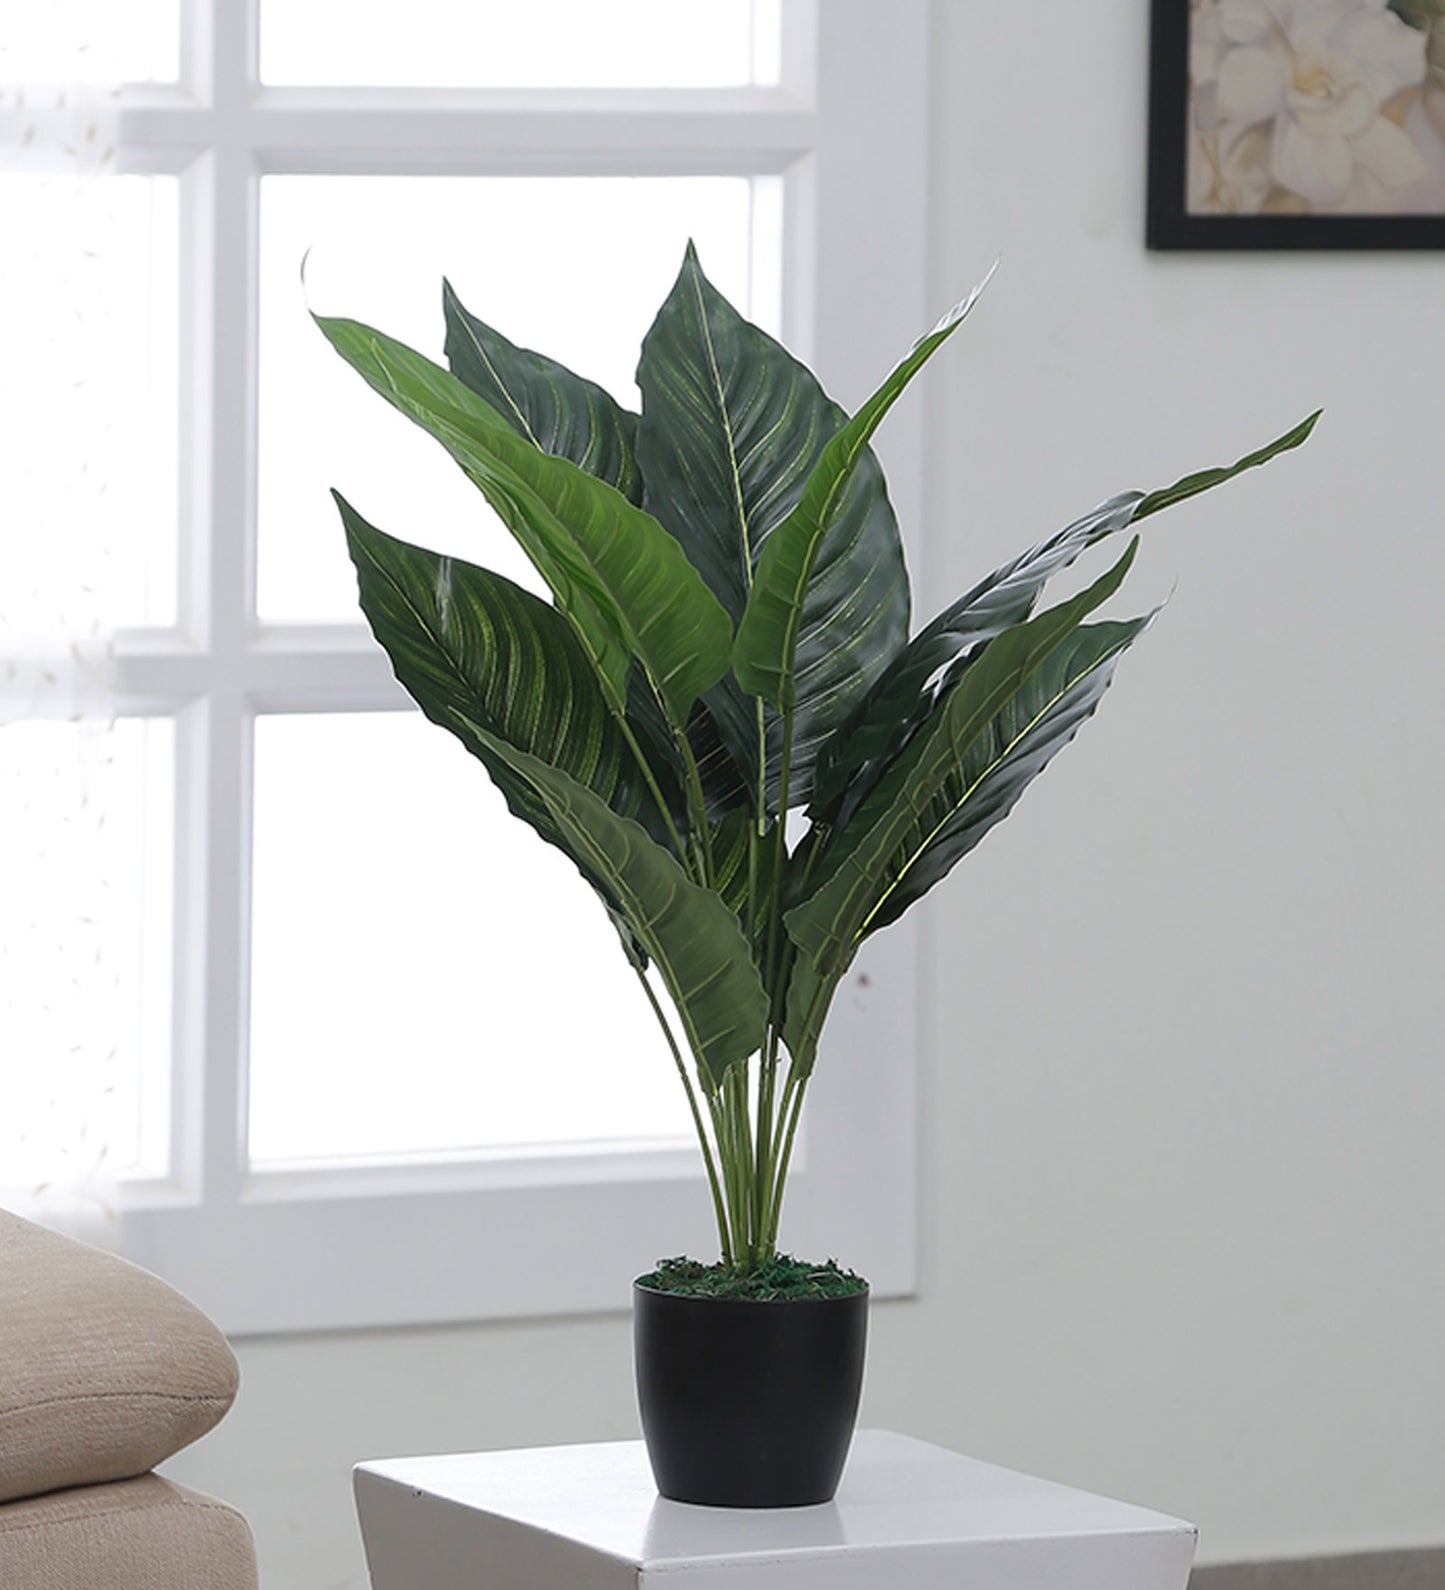 Artificial Spathe Plants | Tree for Home Decoration | Living Room | Office Big/Medium Size with Pot (65 cm Tall, Green)